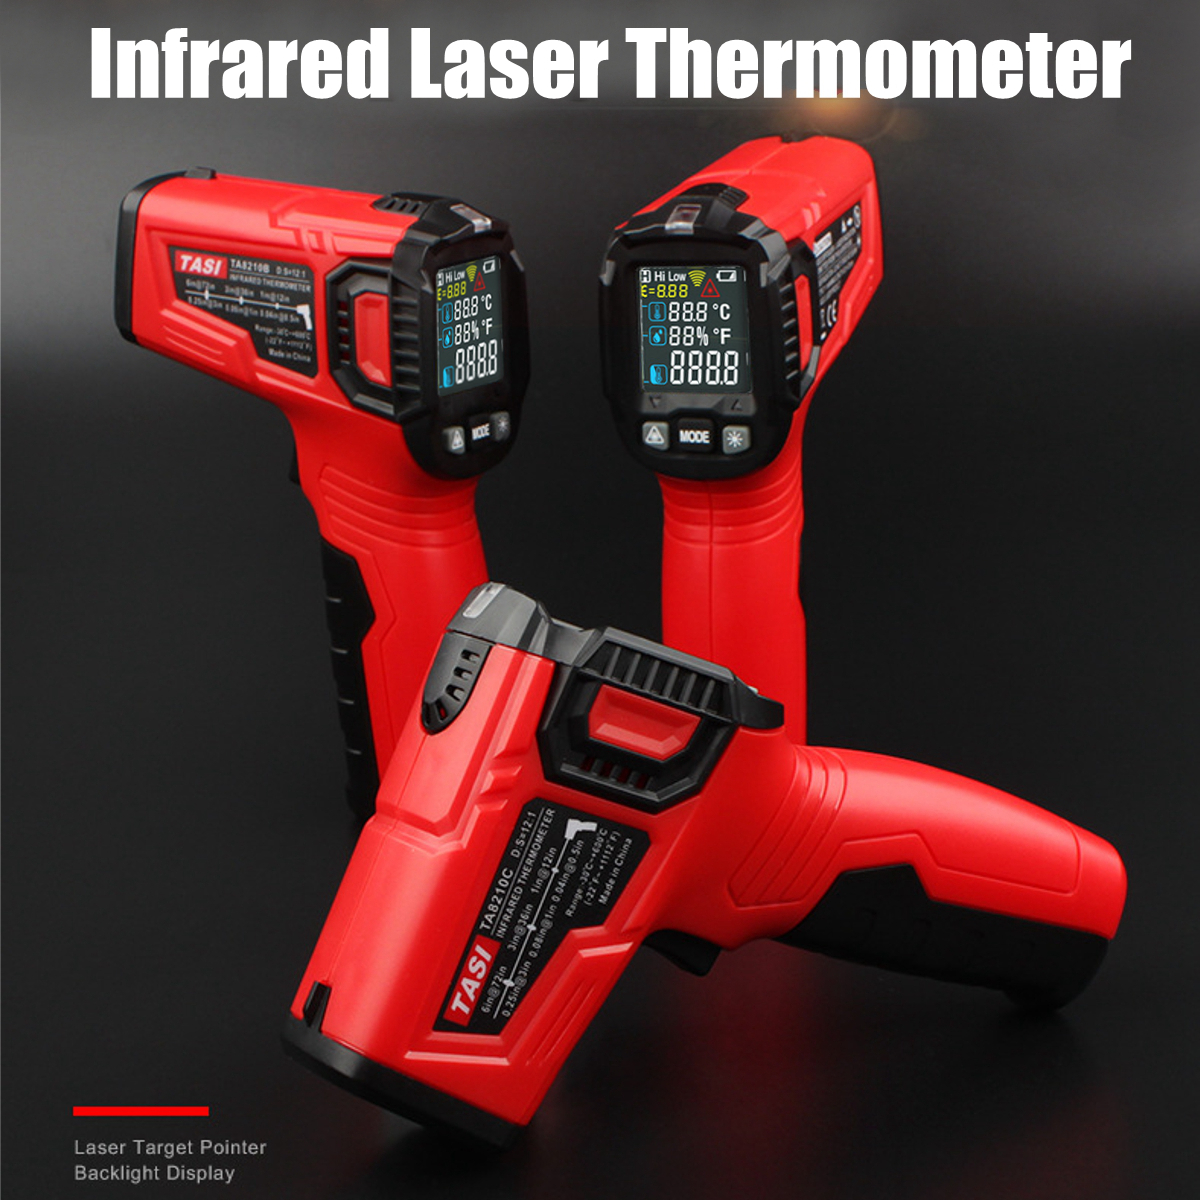 -30~600℃ Temperature Thermometer Infrared Thermometer Humidity Meter Laser Thermometer